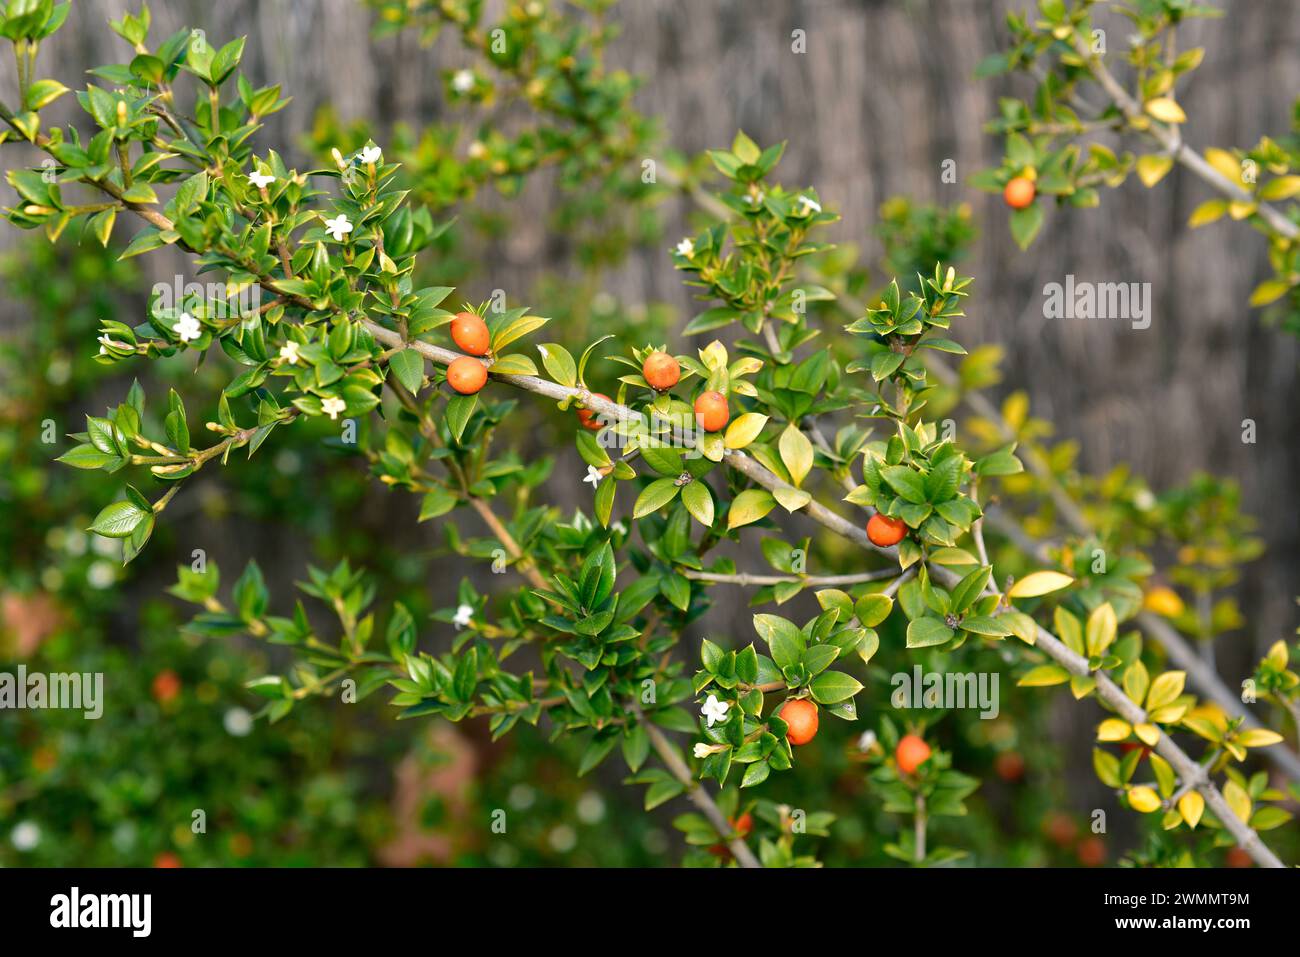 Chain fruit (Alyxia ruscifolia) is a shrub native to Australia. Flowers, fruits and leaves detail. Stock Photo